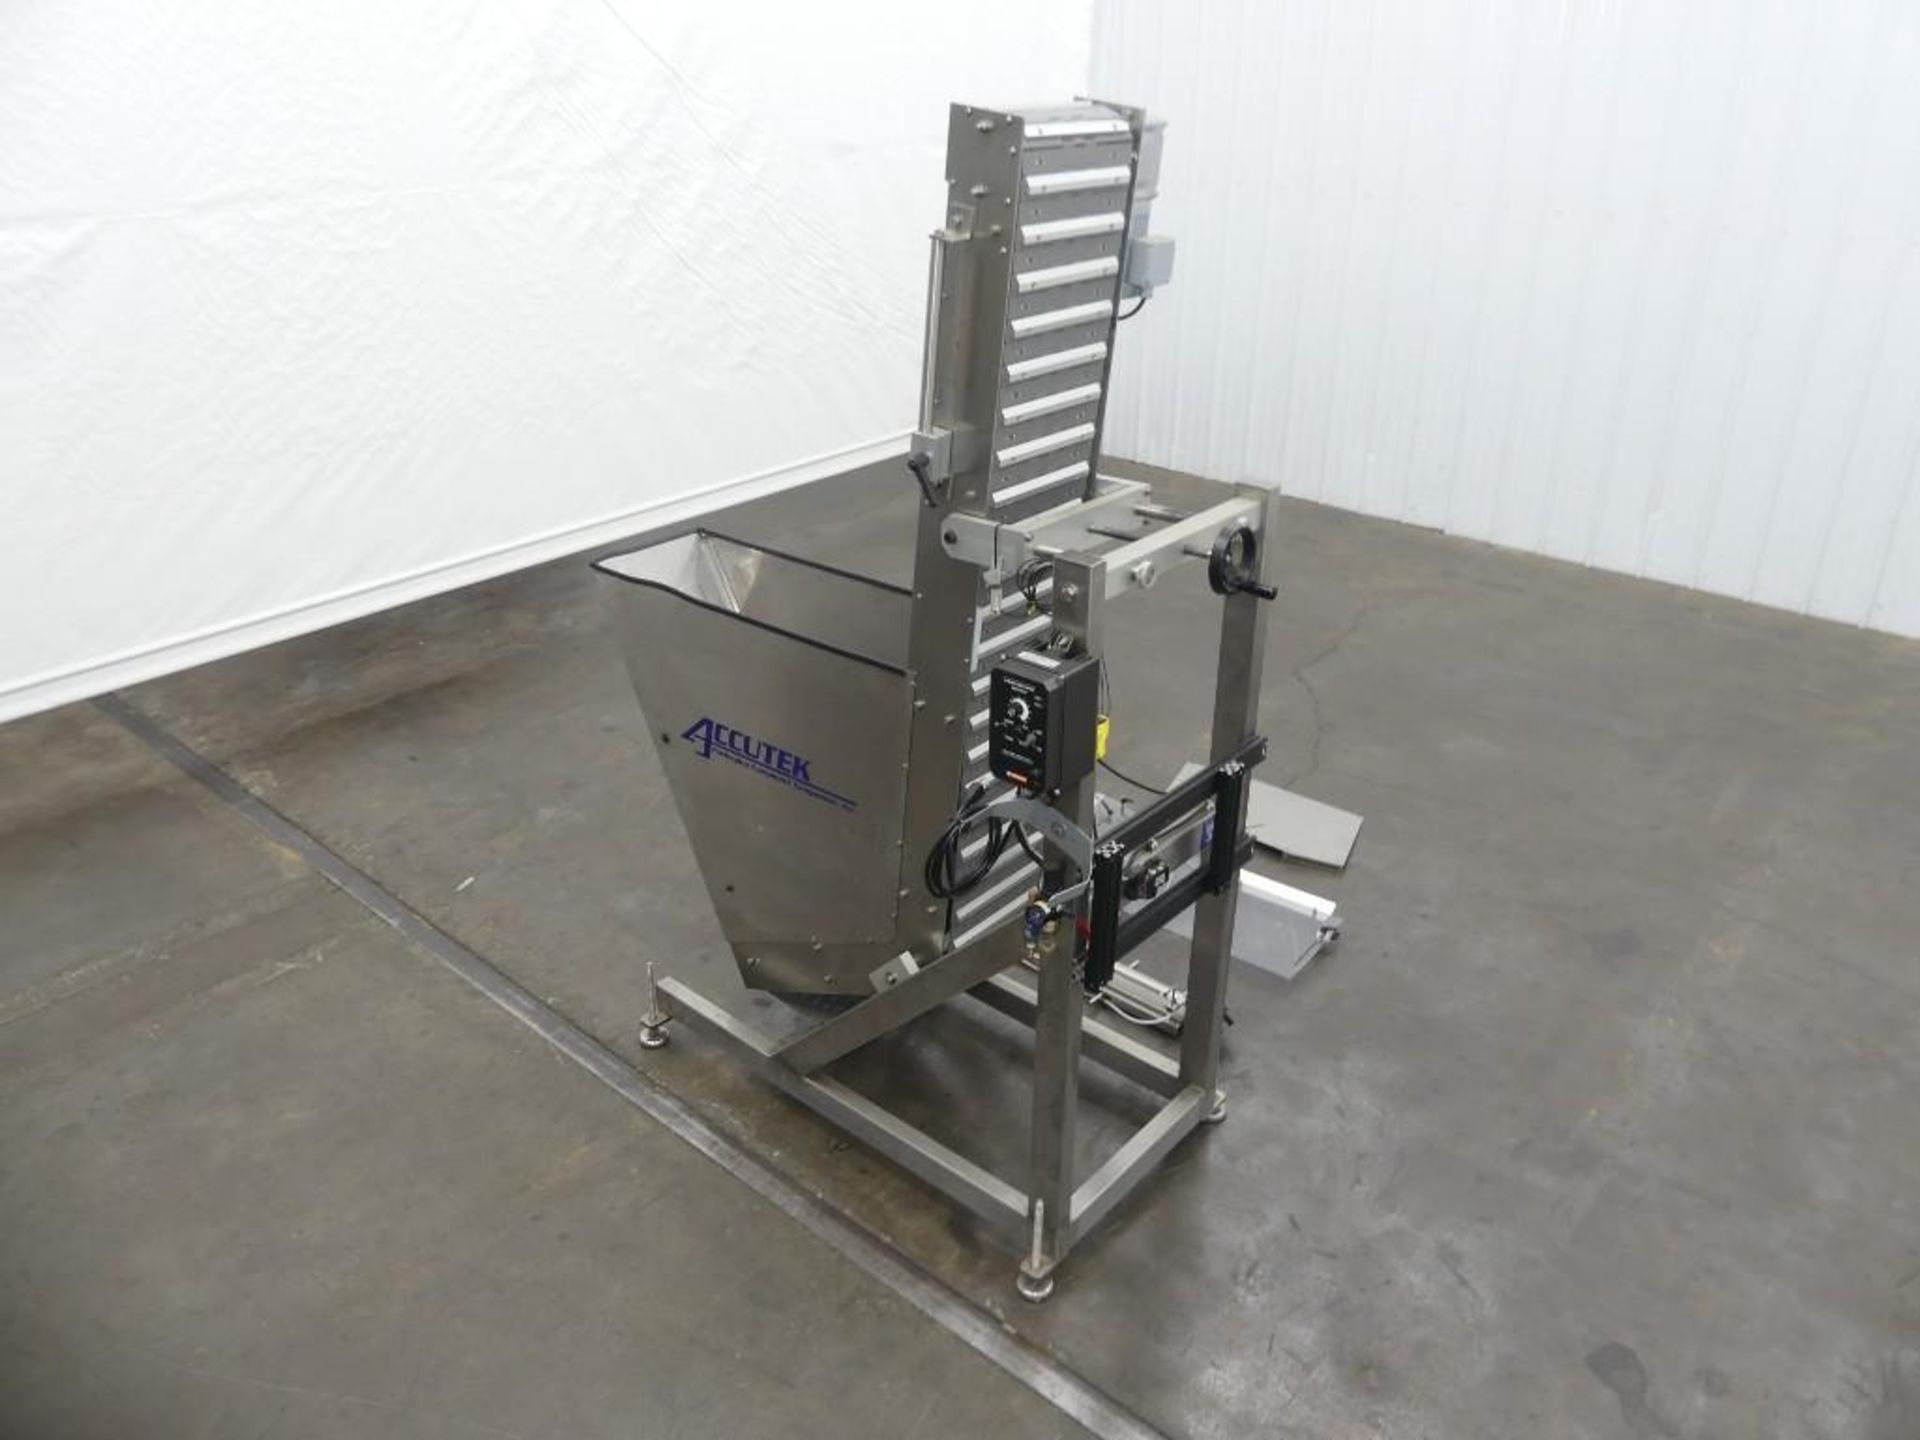 2019 AccuTek Packaging Equipment Co. 50-C0E-CH2 Stainless Steel Cap Loader Elevator - Image 3 of 25